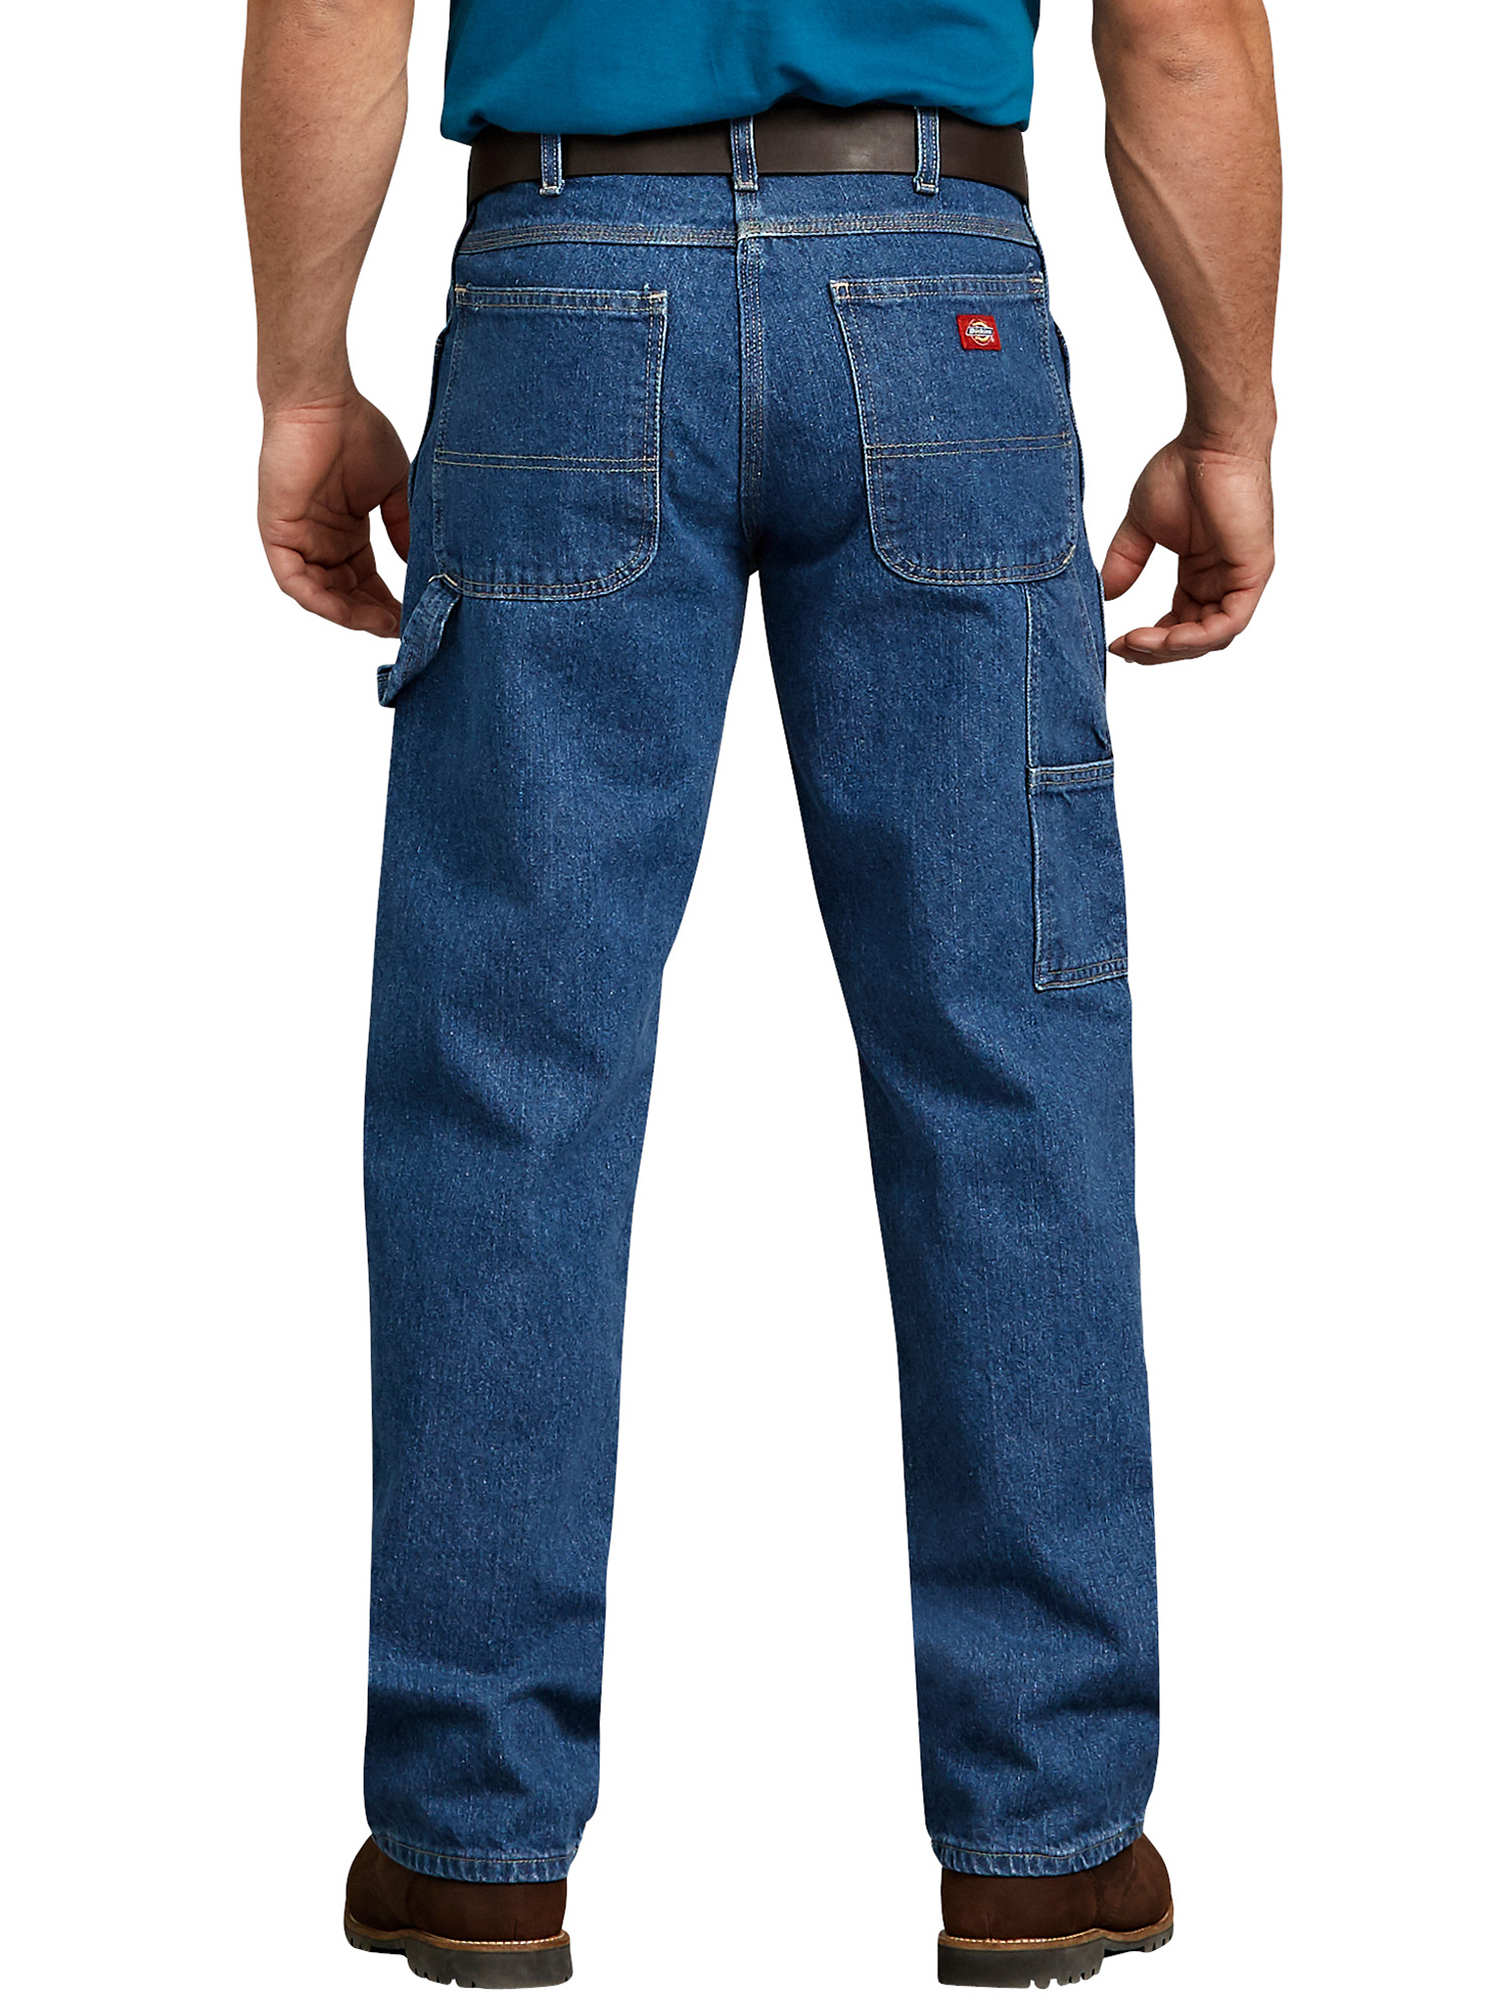 Dickies Mens Relaxed Fit Carpenter Jean - image 2 of 2